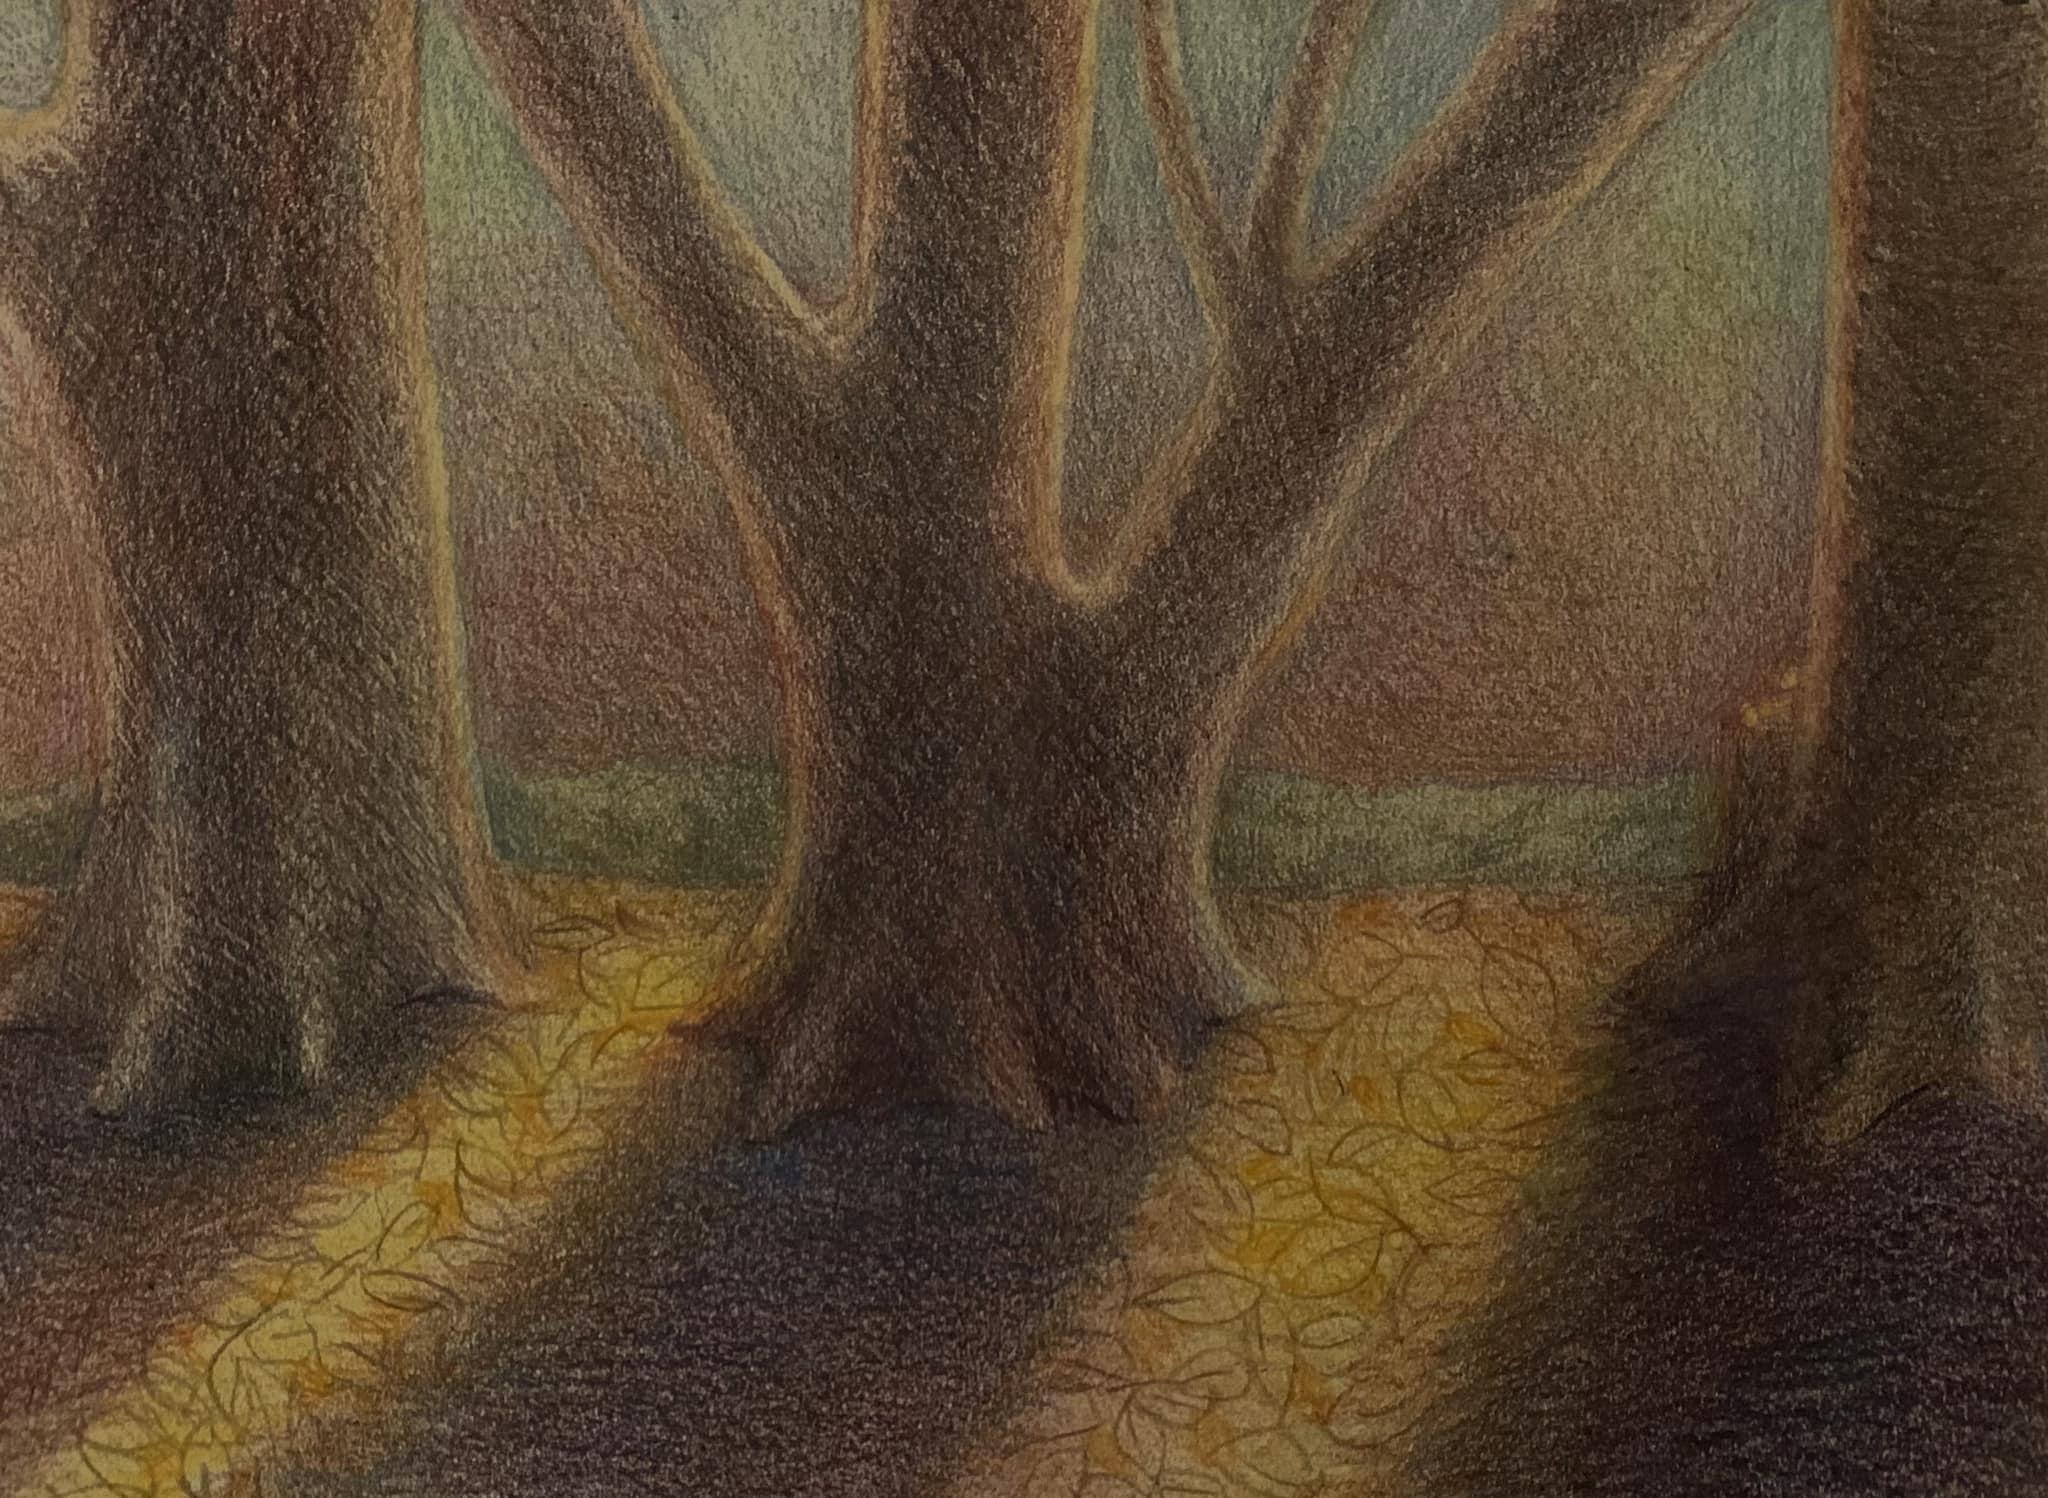 picture book illustration of bare trees, backlit by a sunset casting long shadows on dry leafy ground